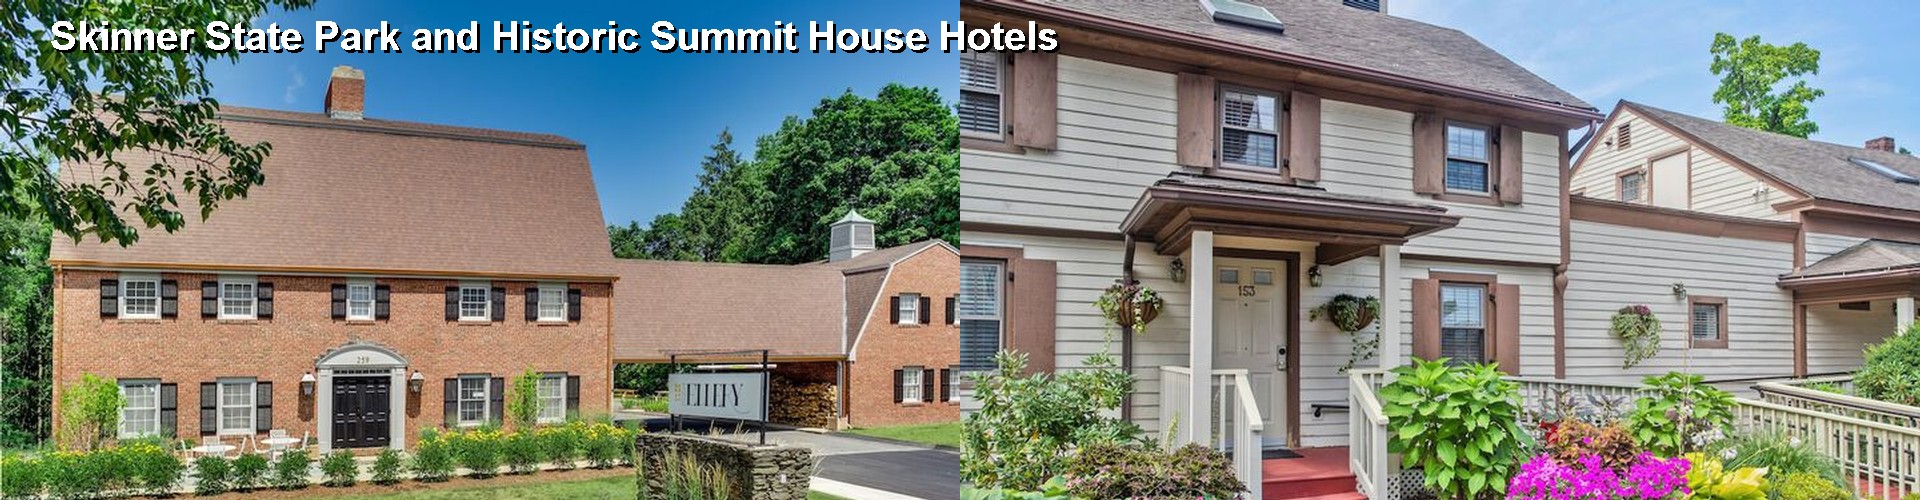 5 Best Hotels near Skinner State Park and Historic Summit House